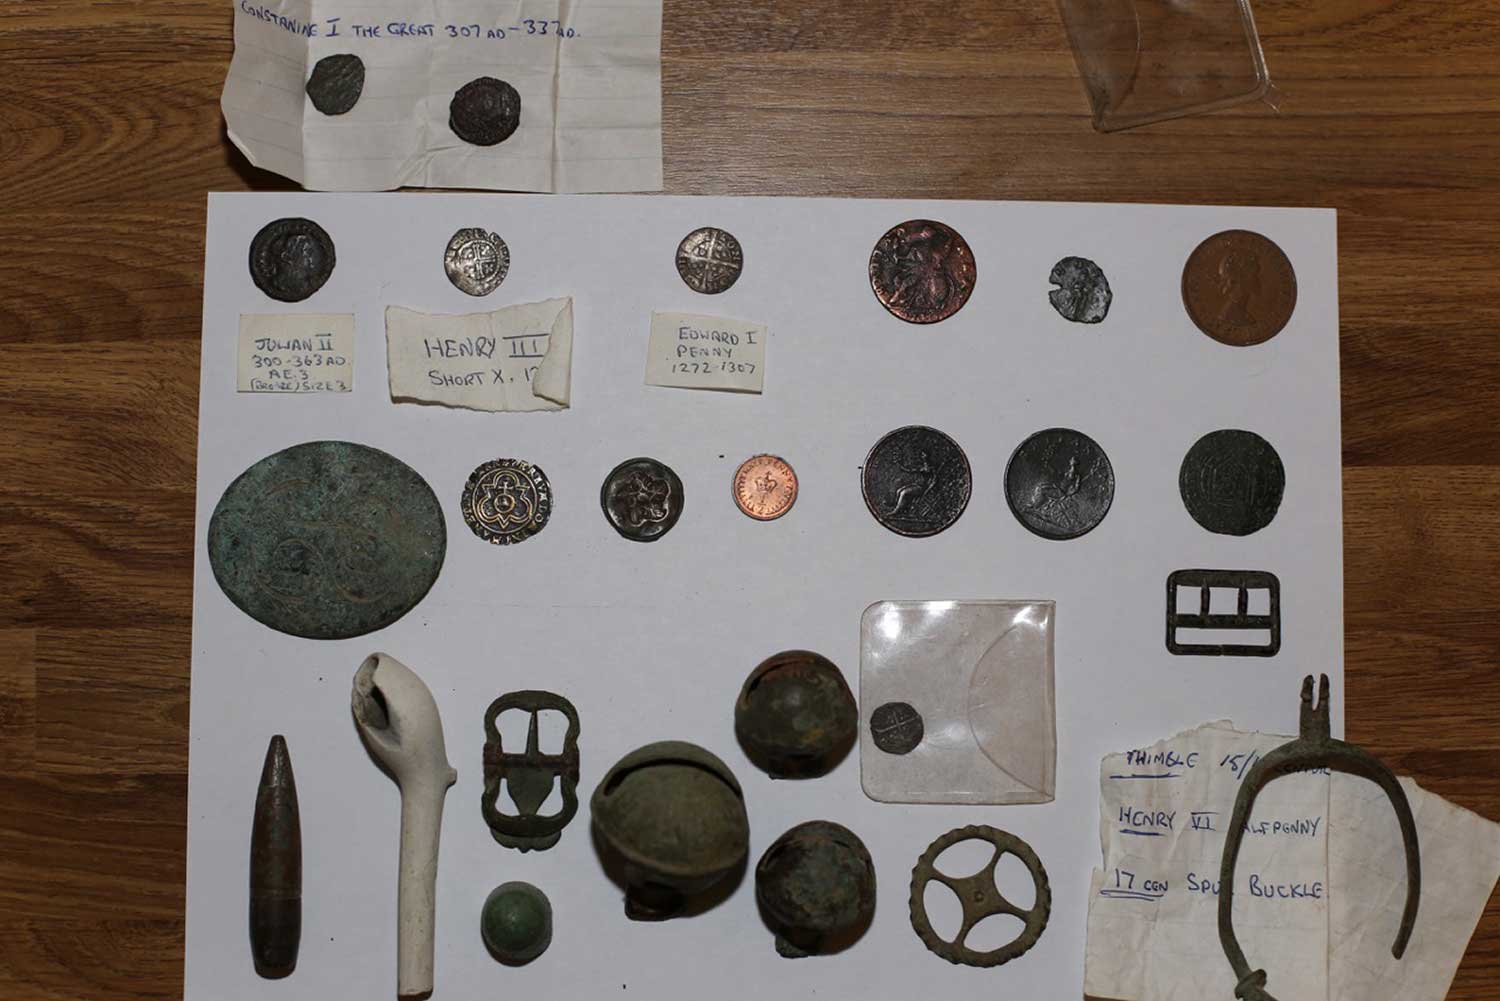 Collection of coins found on the farm from as old as 306 AD